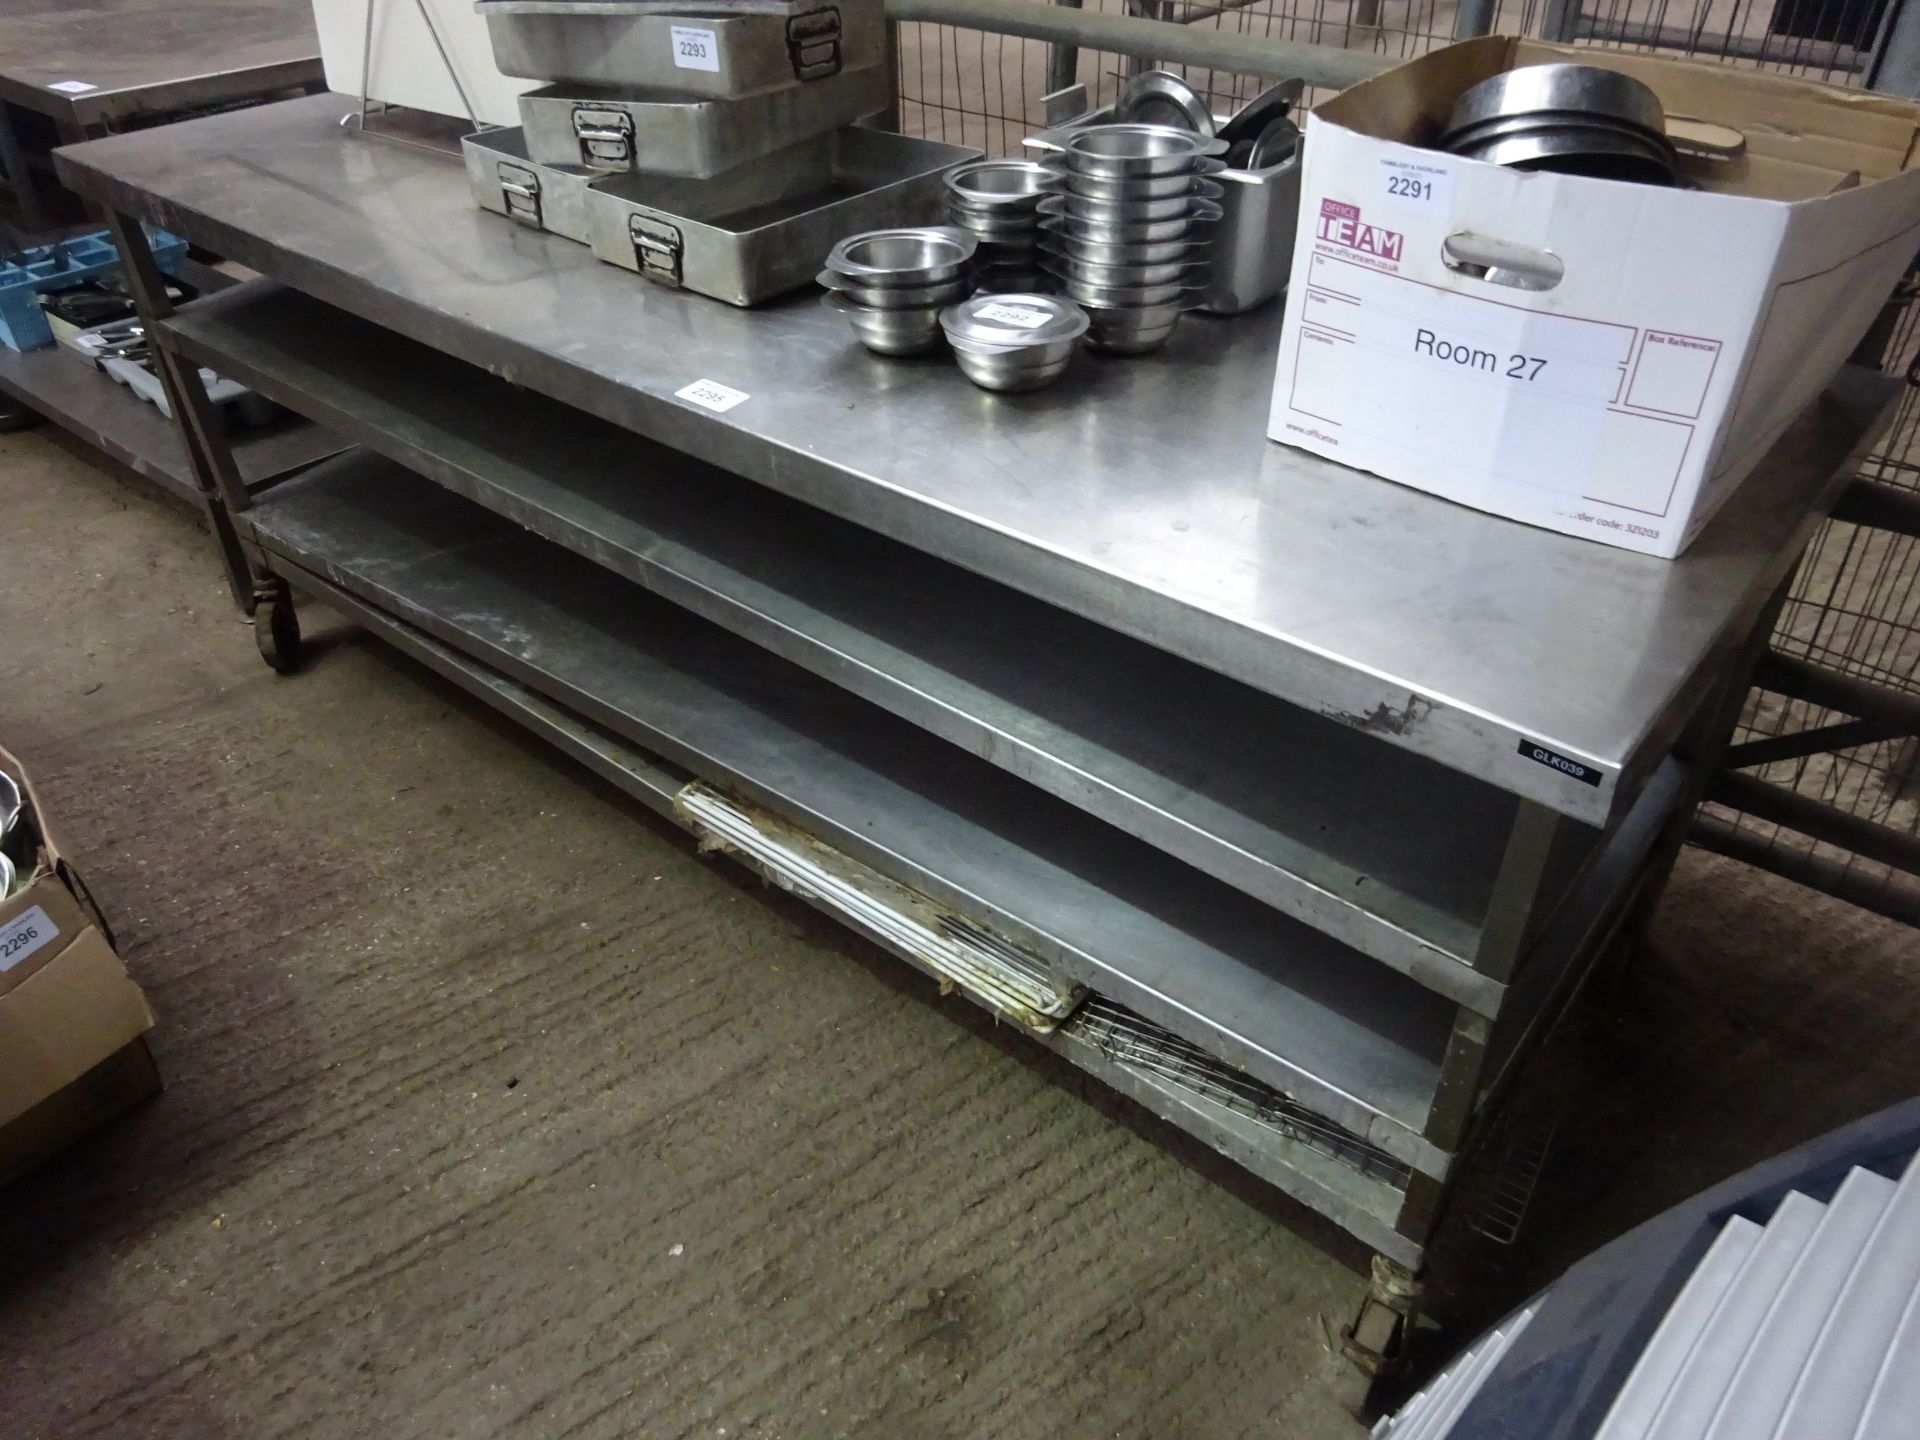 Mobile stainless steel preparation table with three under shelves, W: 213cms, D: 76cms, H: 85cms